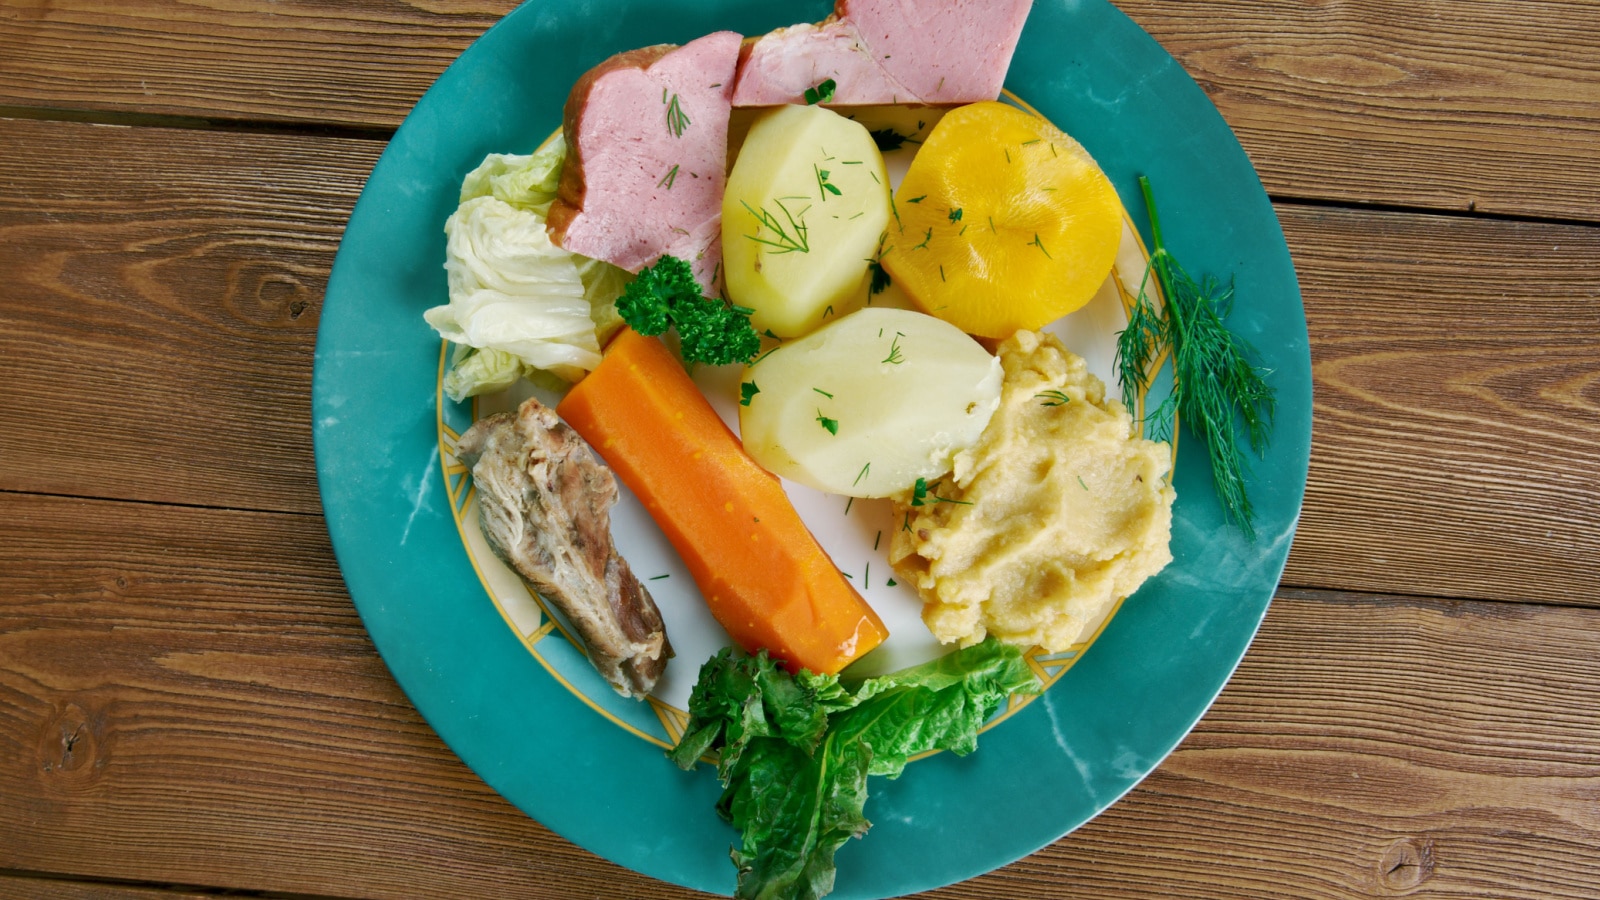 Jiggs dinner - traditional meal of Newfoundland and Labrador, Canada.